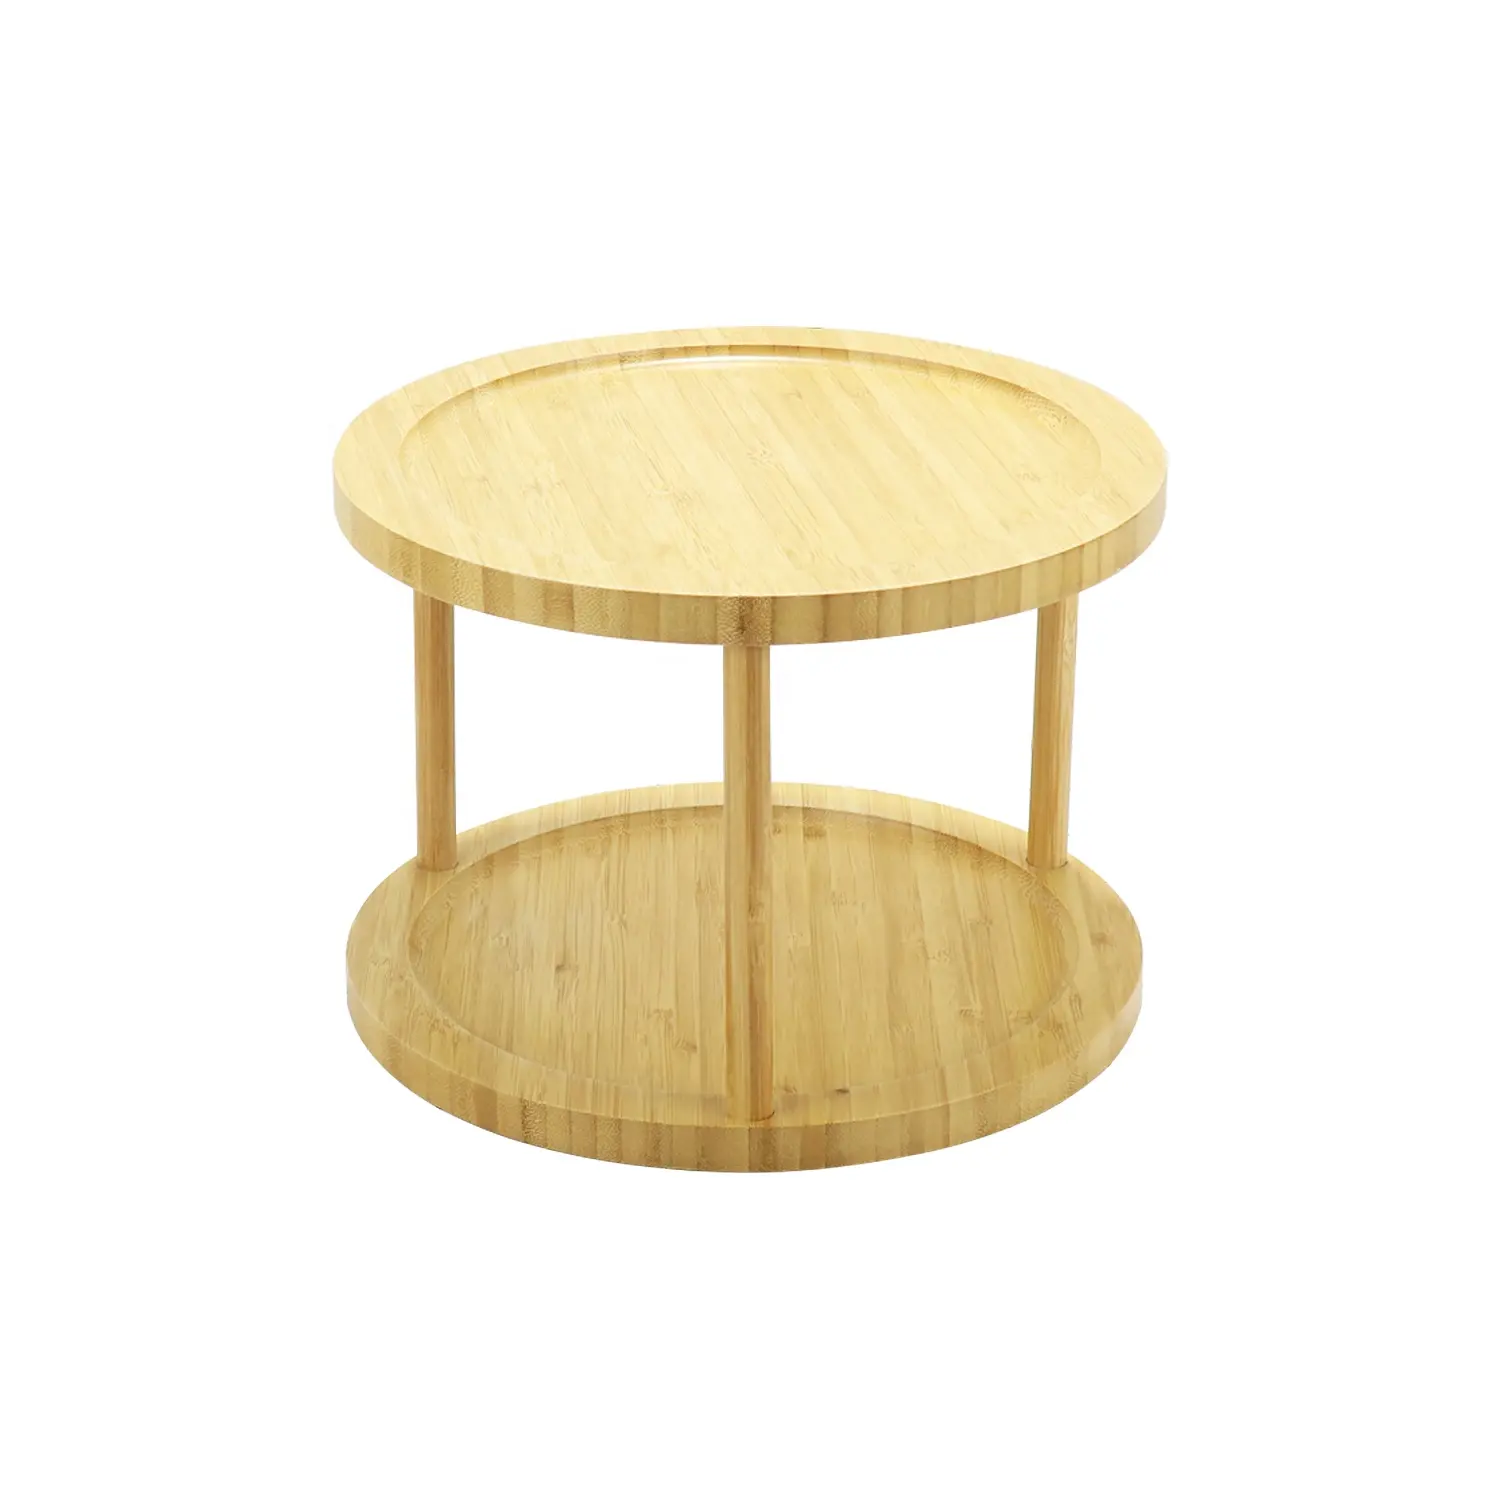 Bamboo double layer cake stand Hotel kitchen can rotate condiment storage rack afternoon tea heart fruit tray